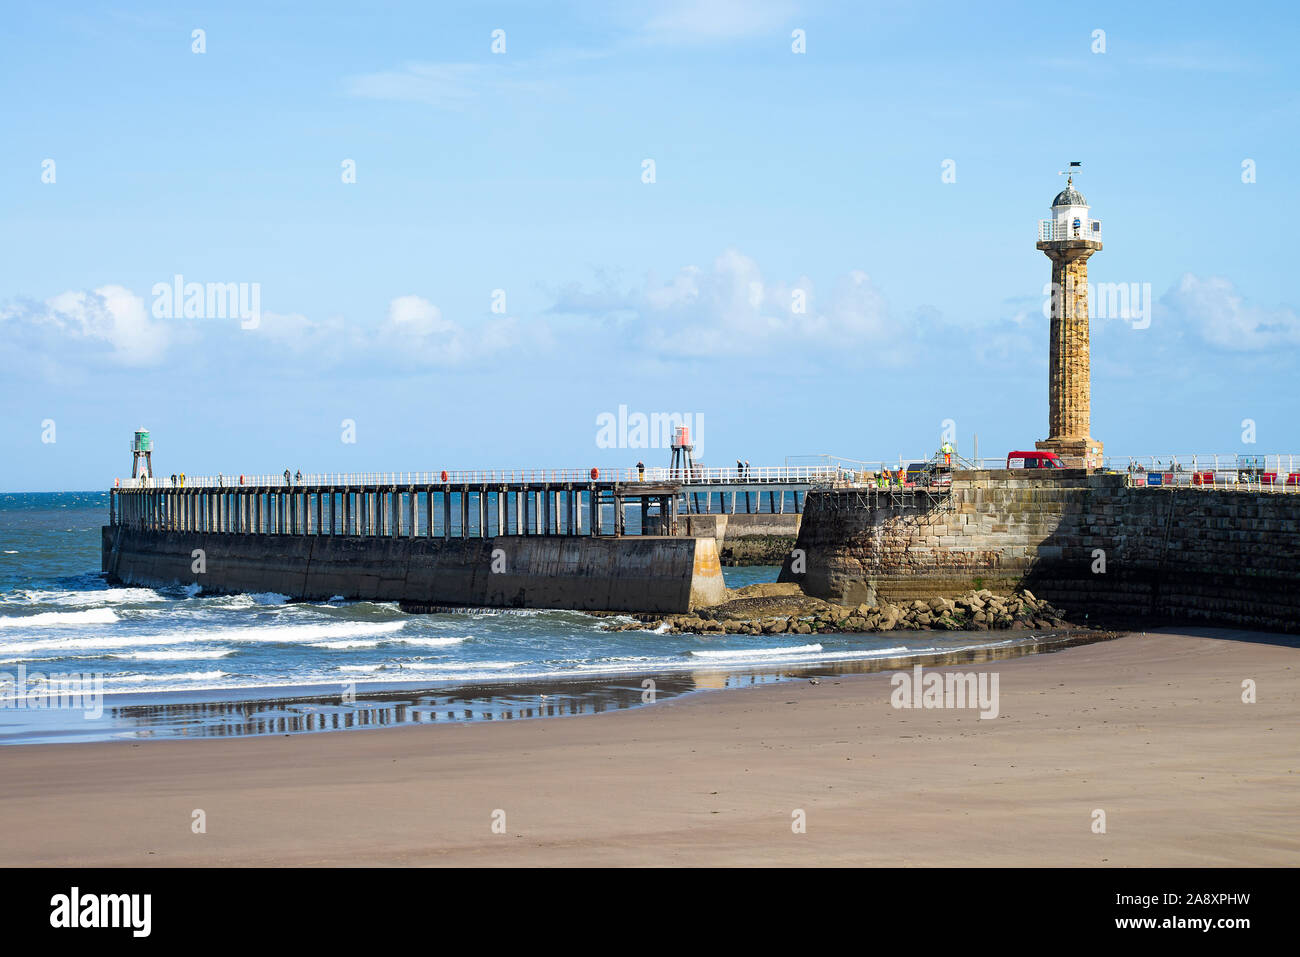 The Beautiful Sandy Beach at Whitby Together With Sea Wall and Entrance to the River Esk Estuary and Lighthouse North Yorkshire England UK Stock Photo